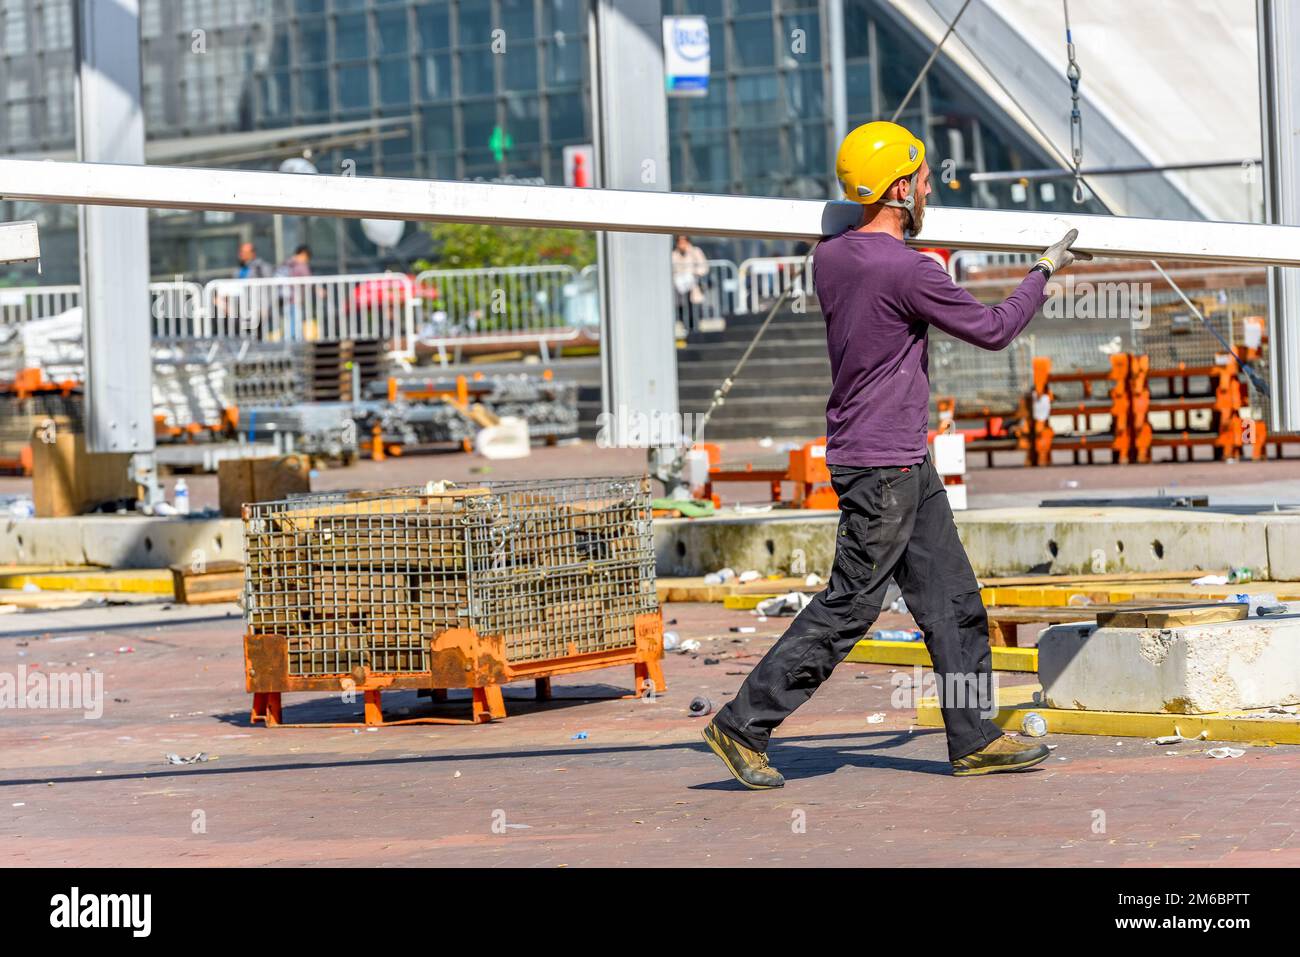 La defense, France- April 10, 2014: Construction worker carrying a steel beam on his shoulders Stock Photo